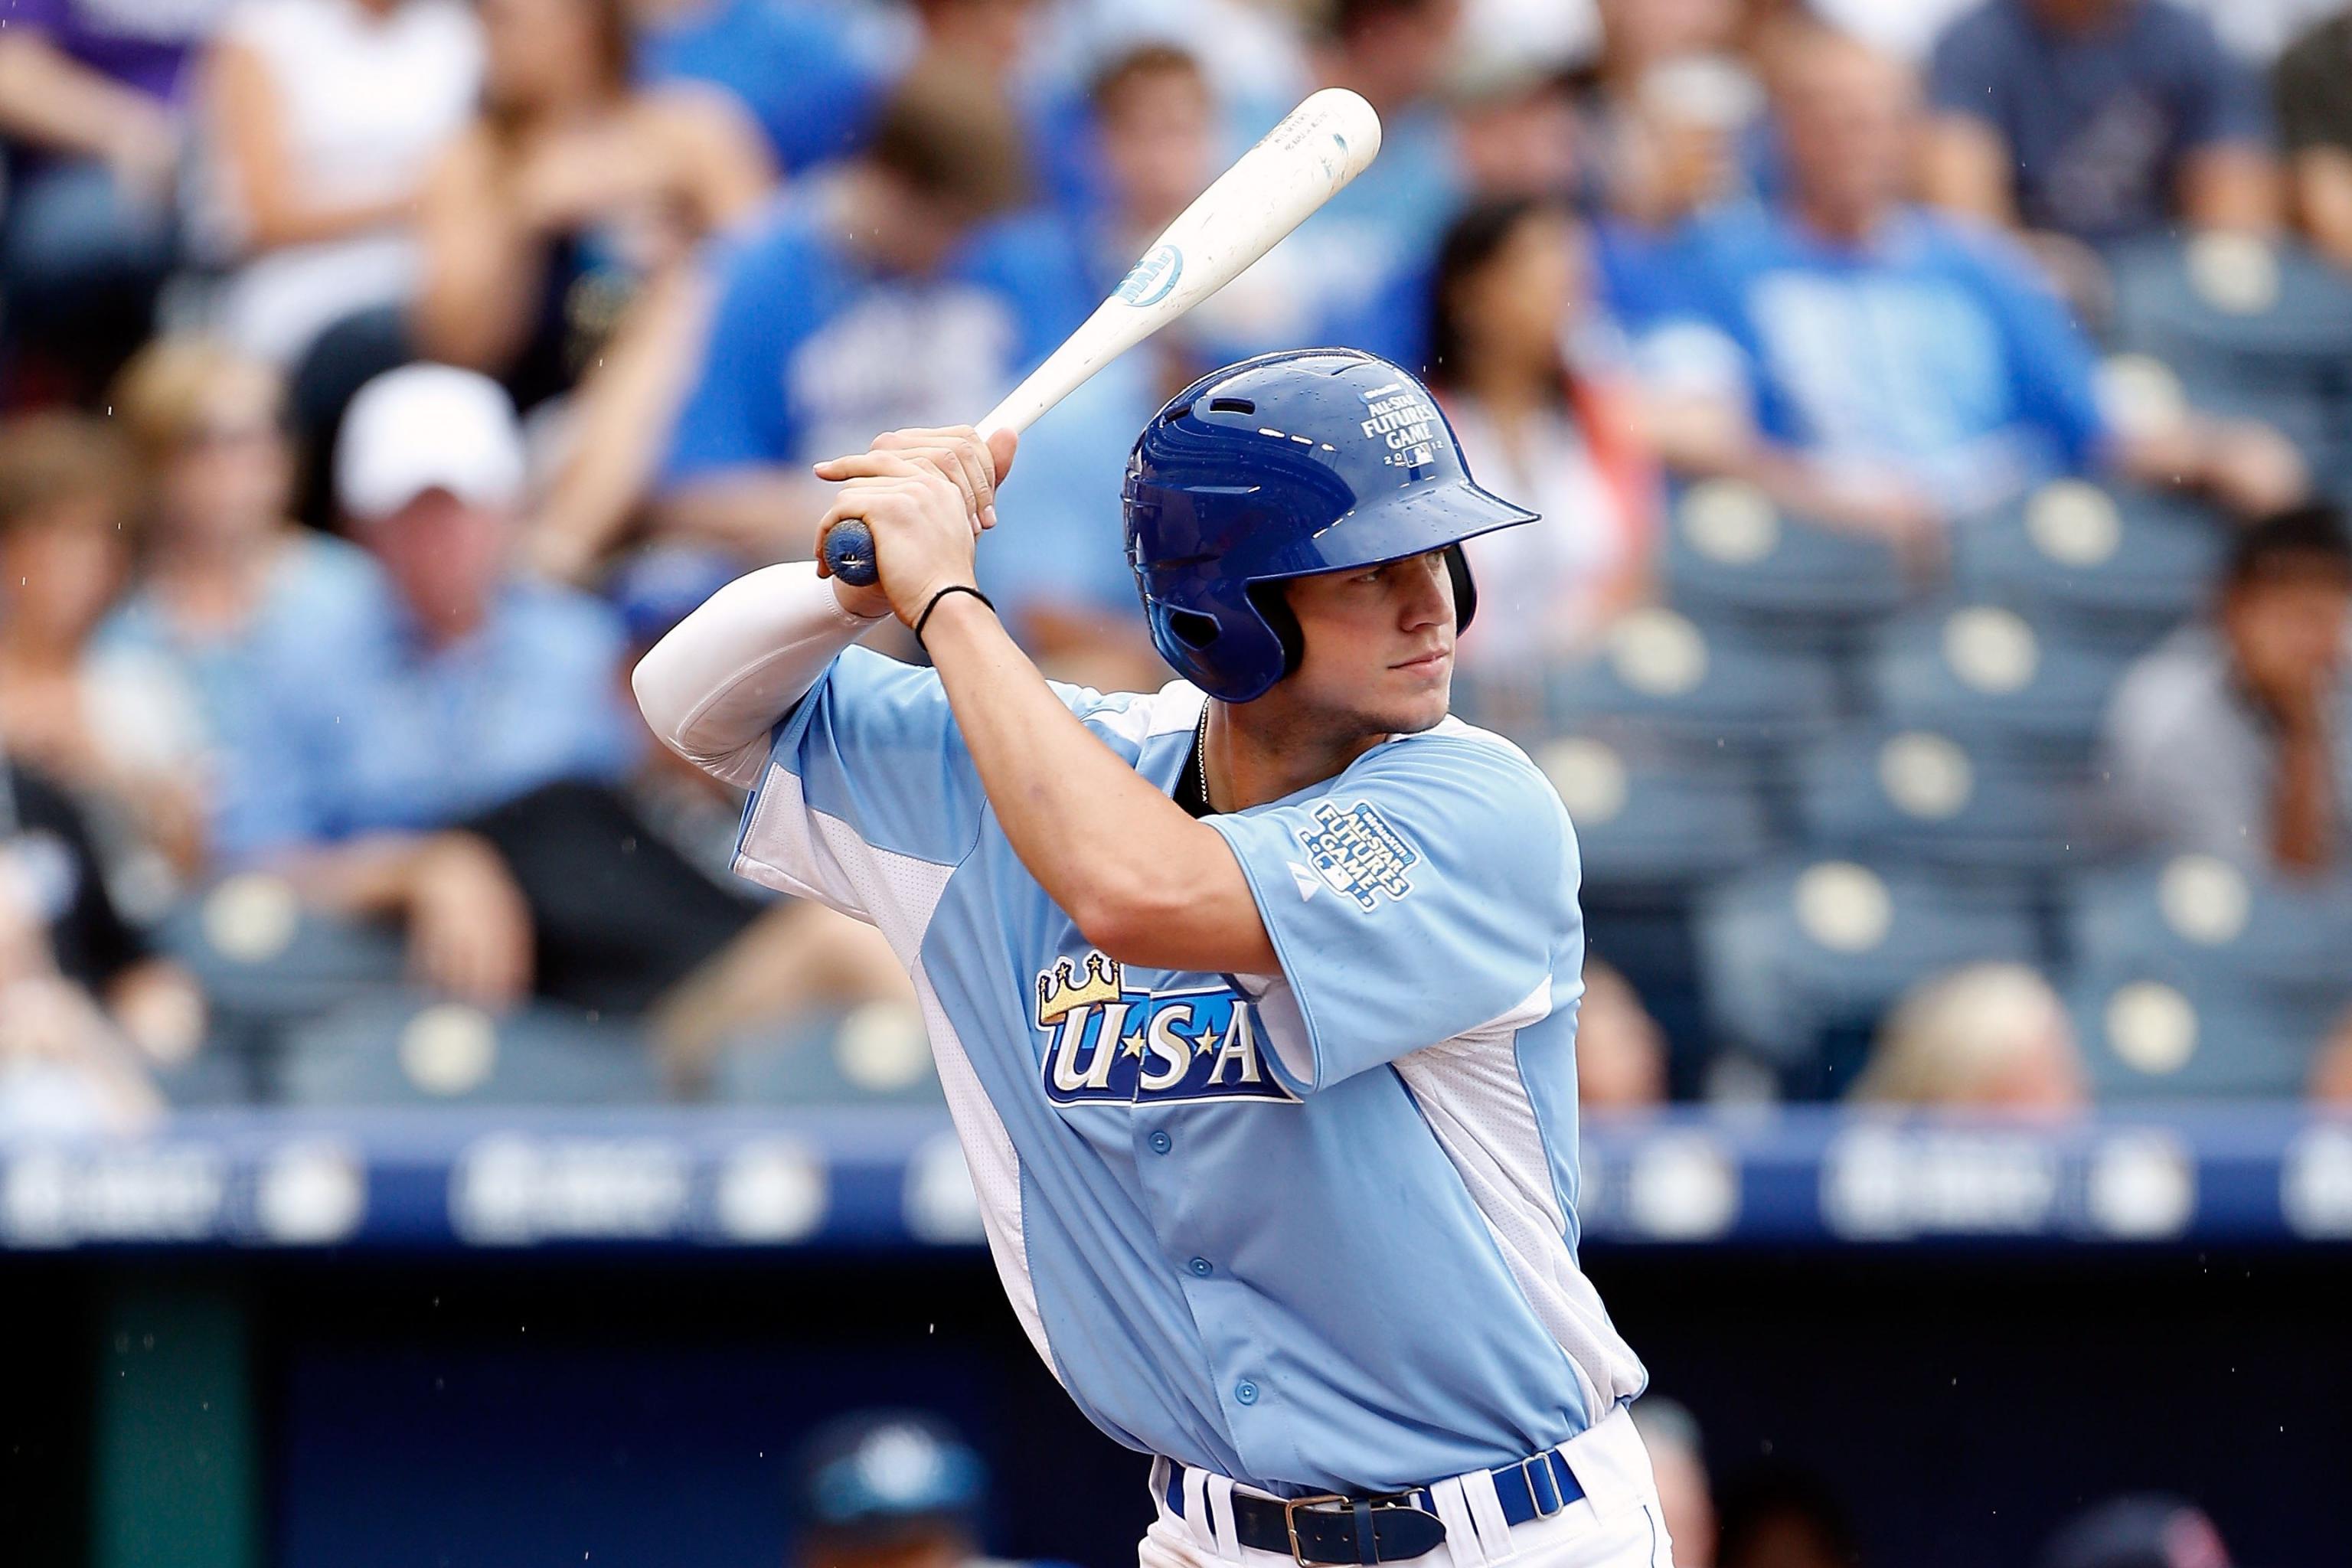 KC Royals: Could Trading For Wil Myers Help KC?